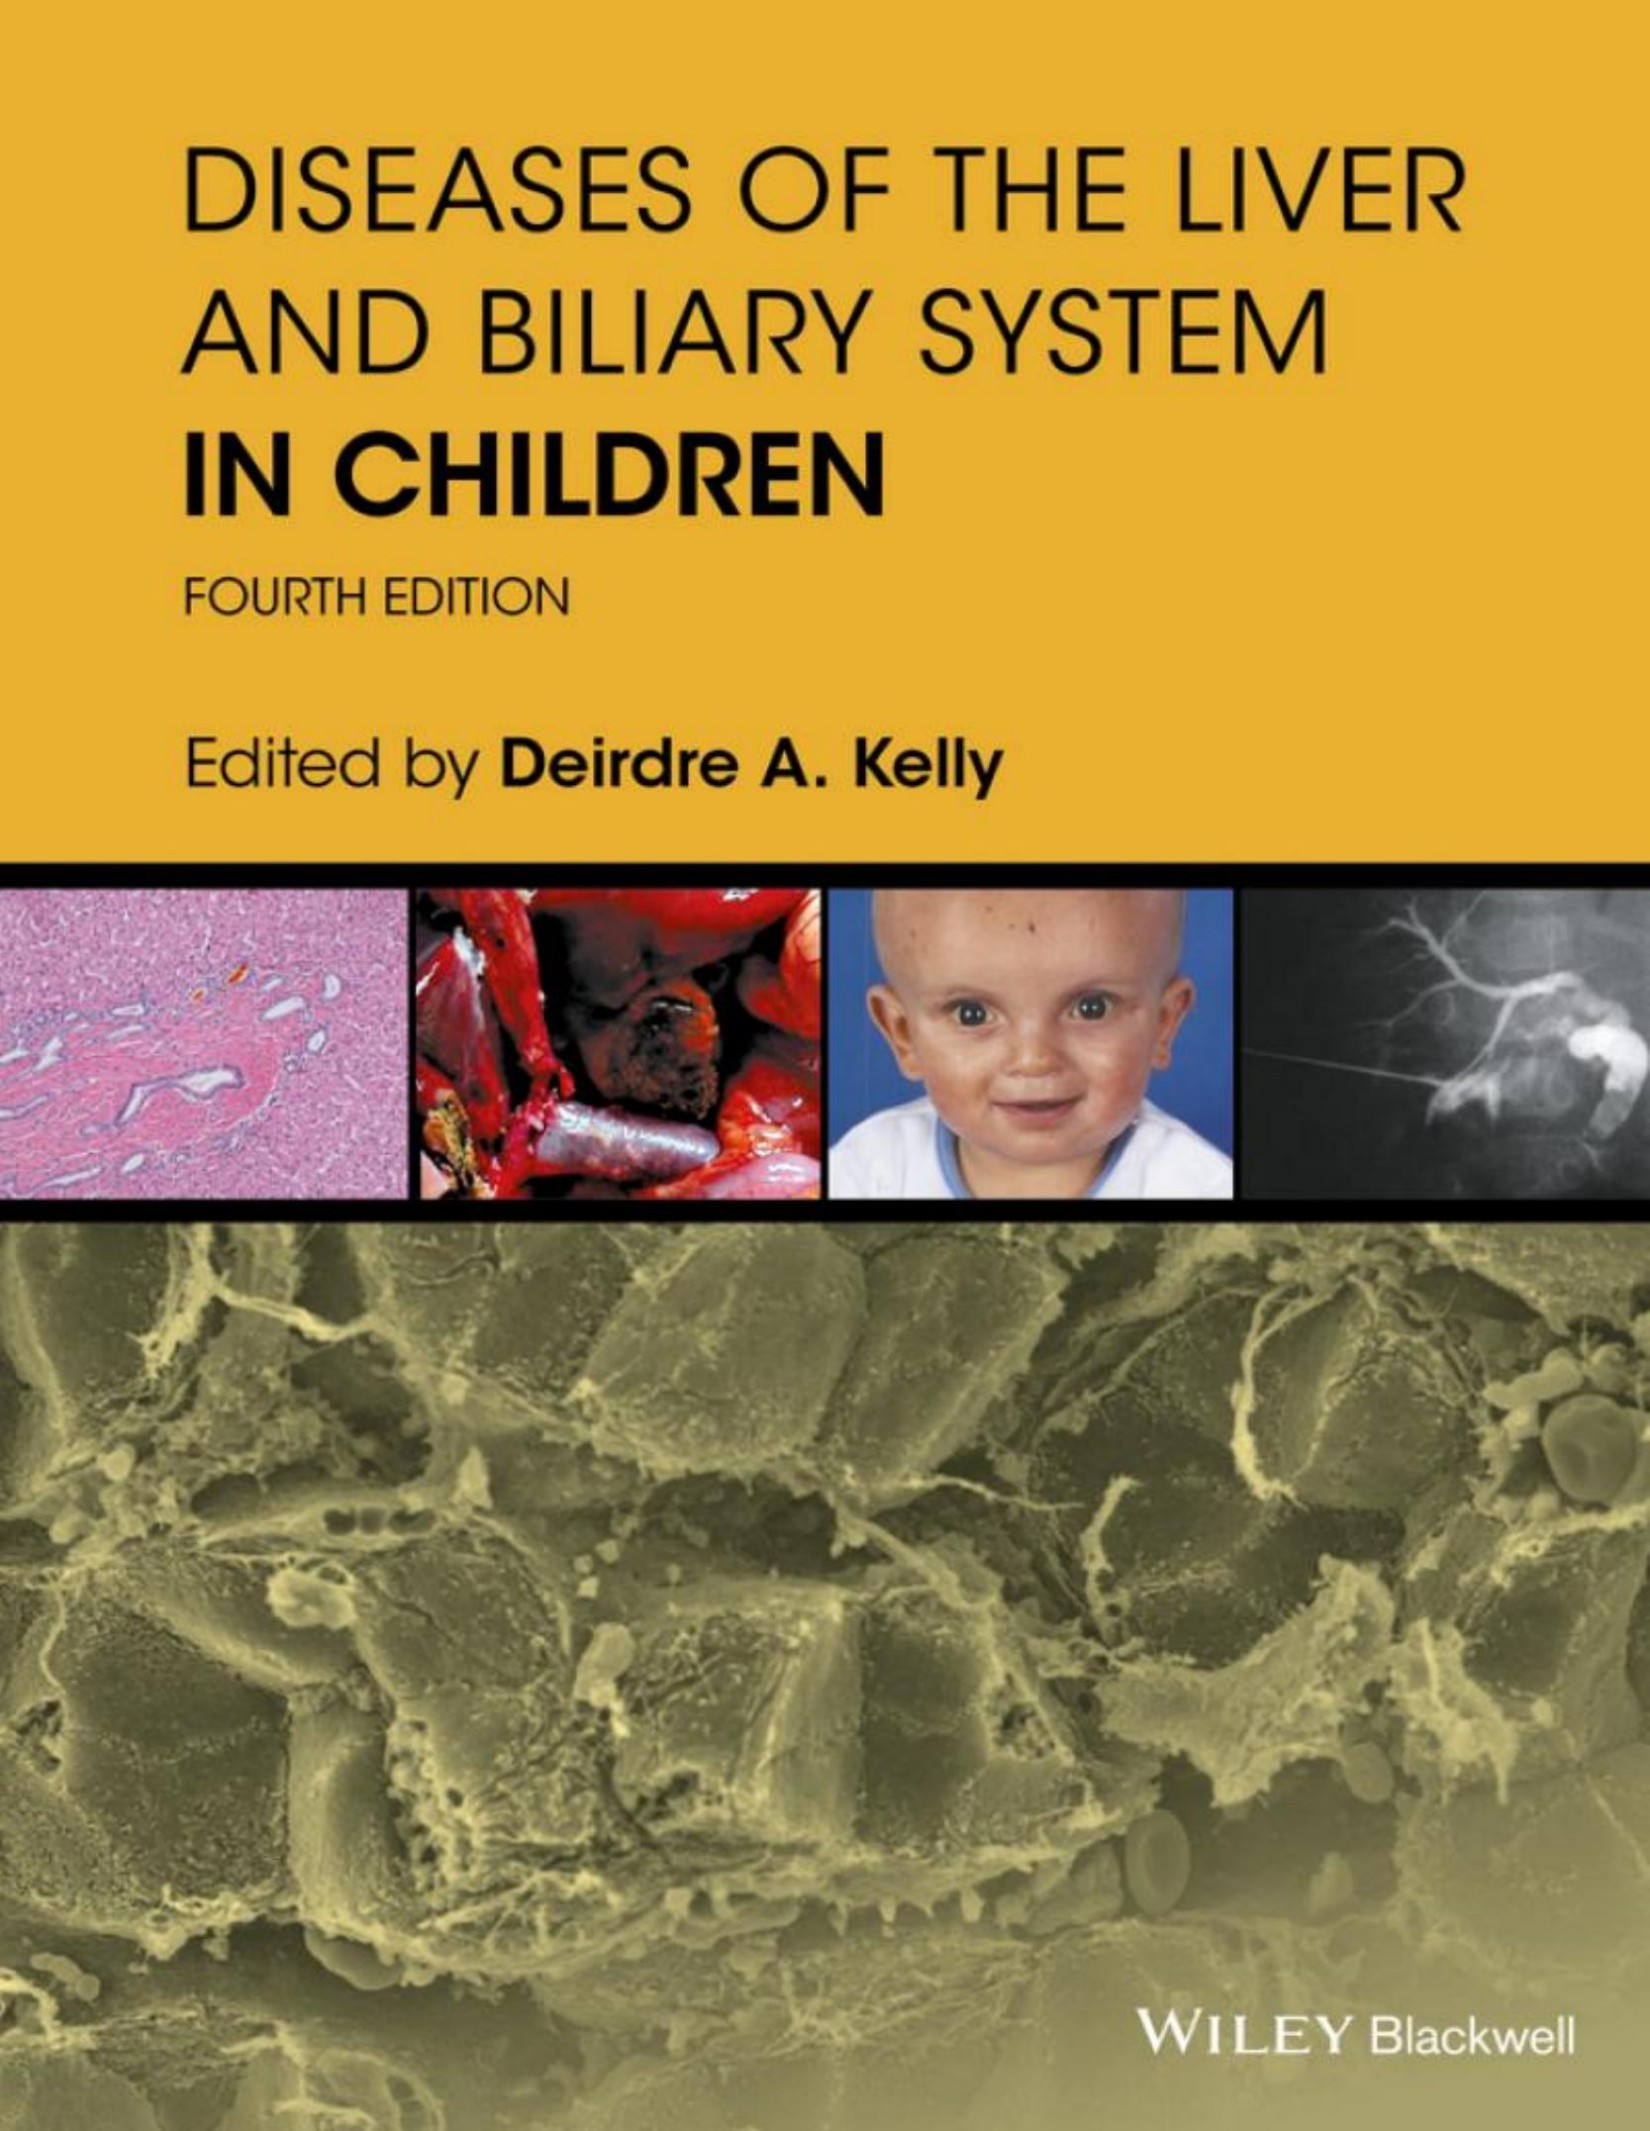 DISEASES OF THE LIVER AND BILIARY SYSTEM IN CHILDREN 4th ed 2017